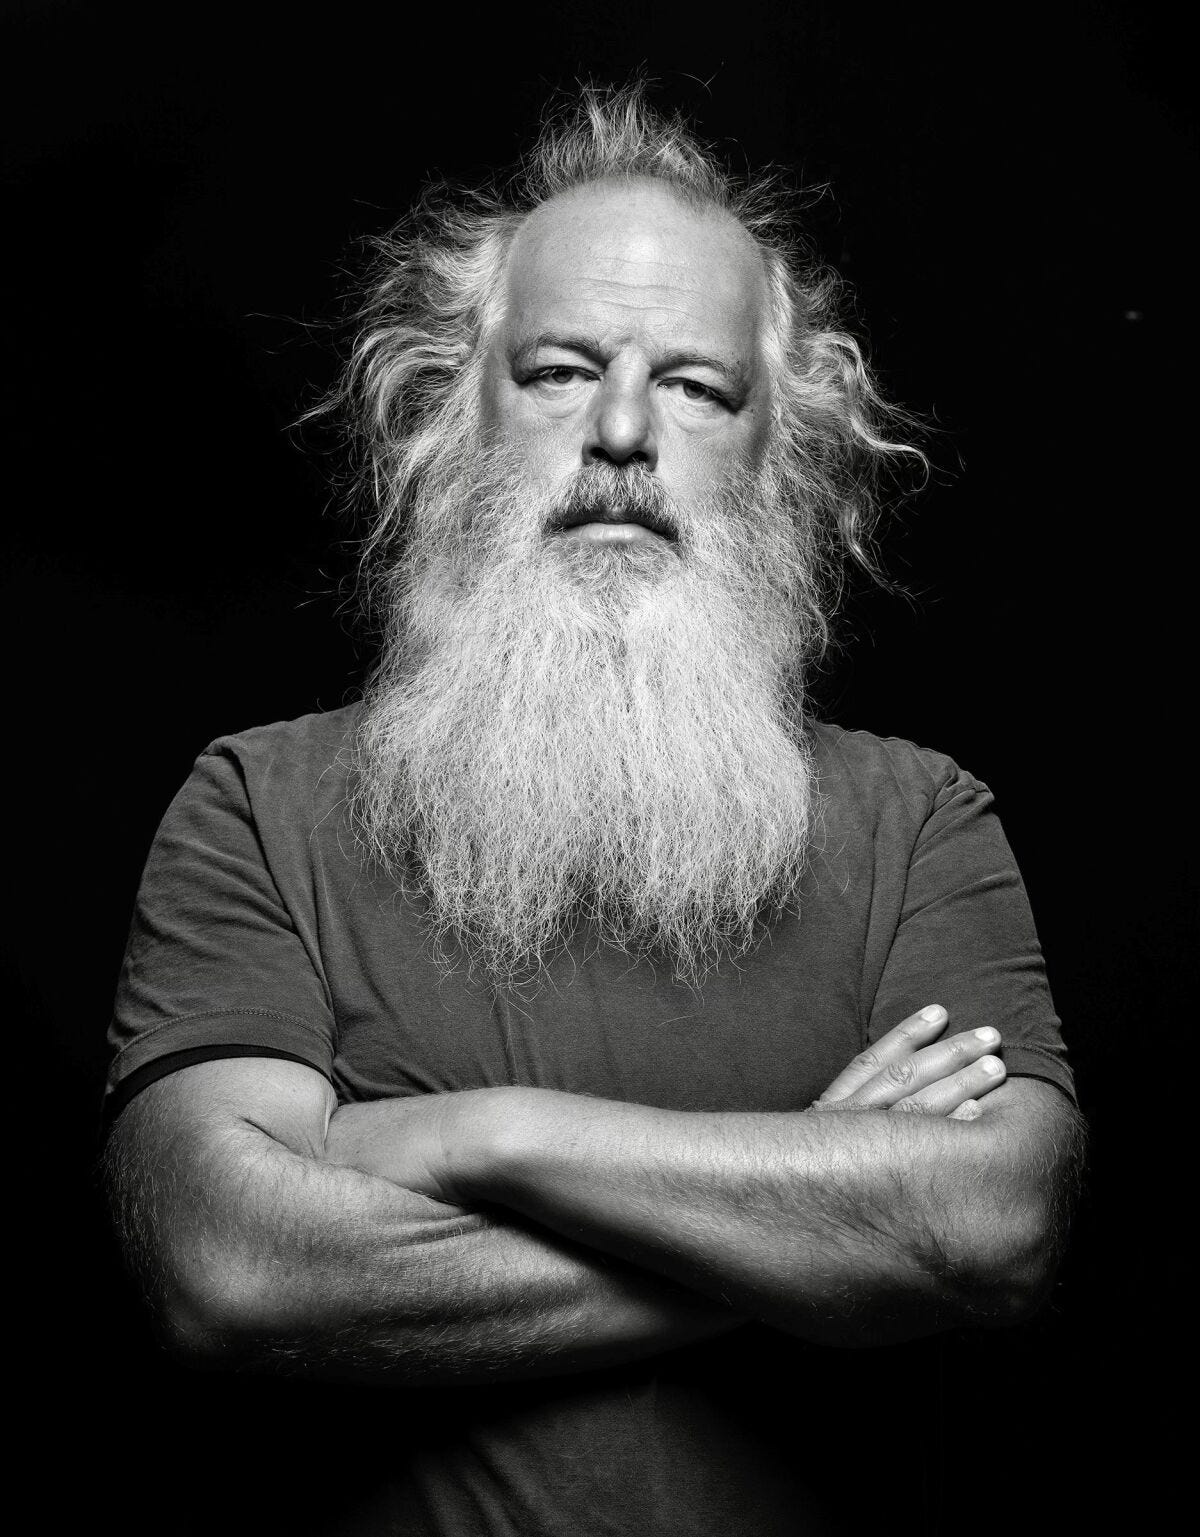 Producer Rick Rubin's self-help book 'The Creative Act' - Los Angeles Times